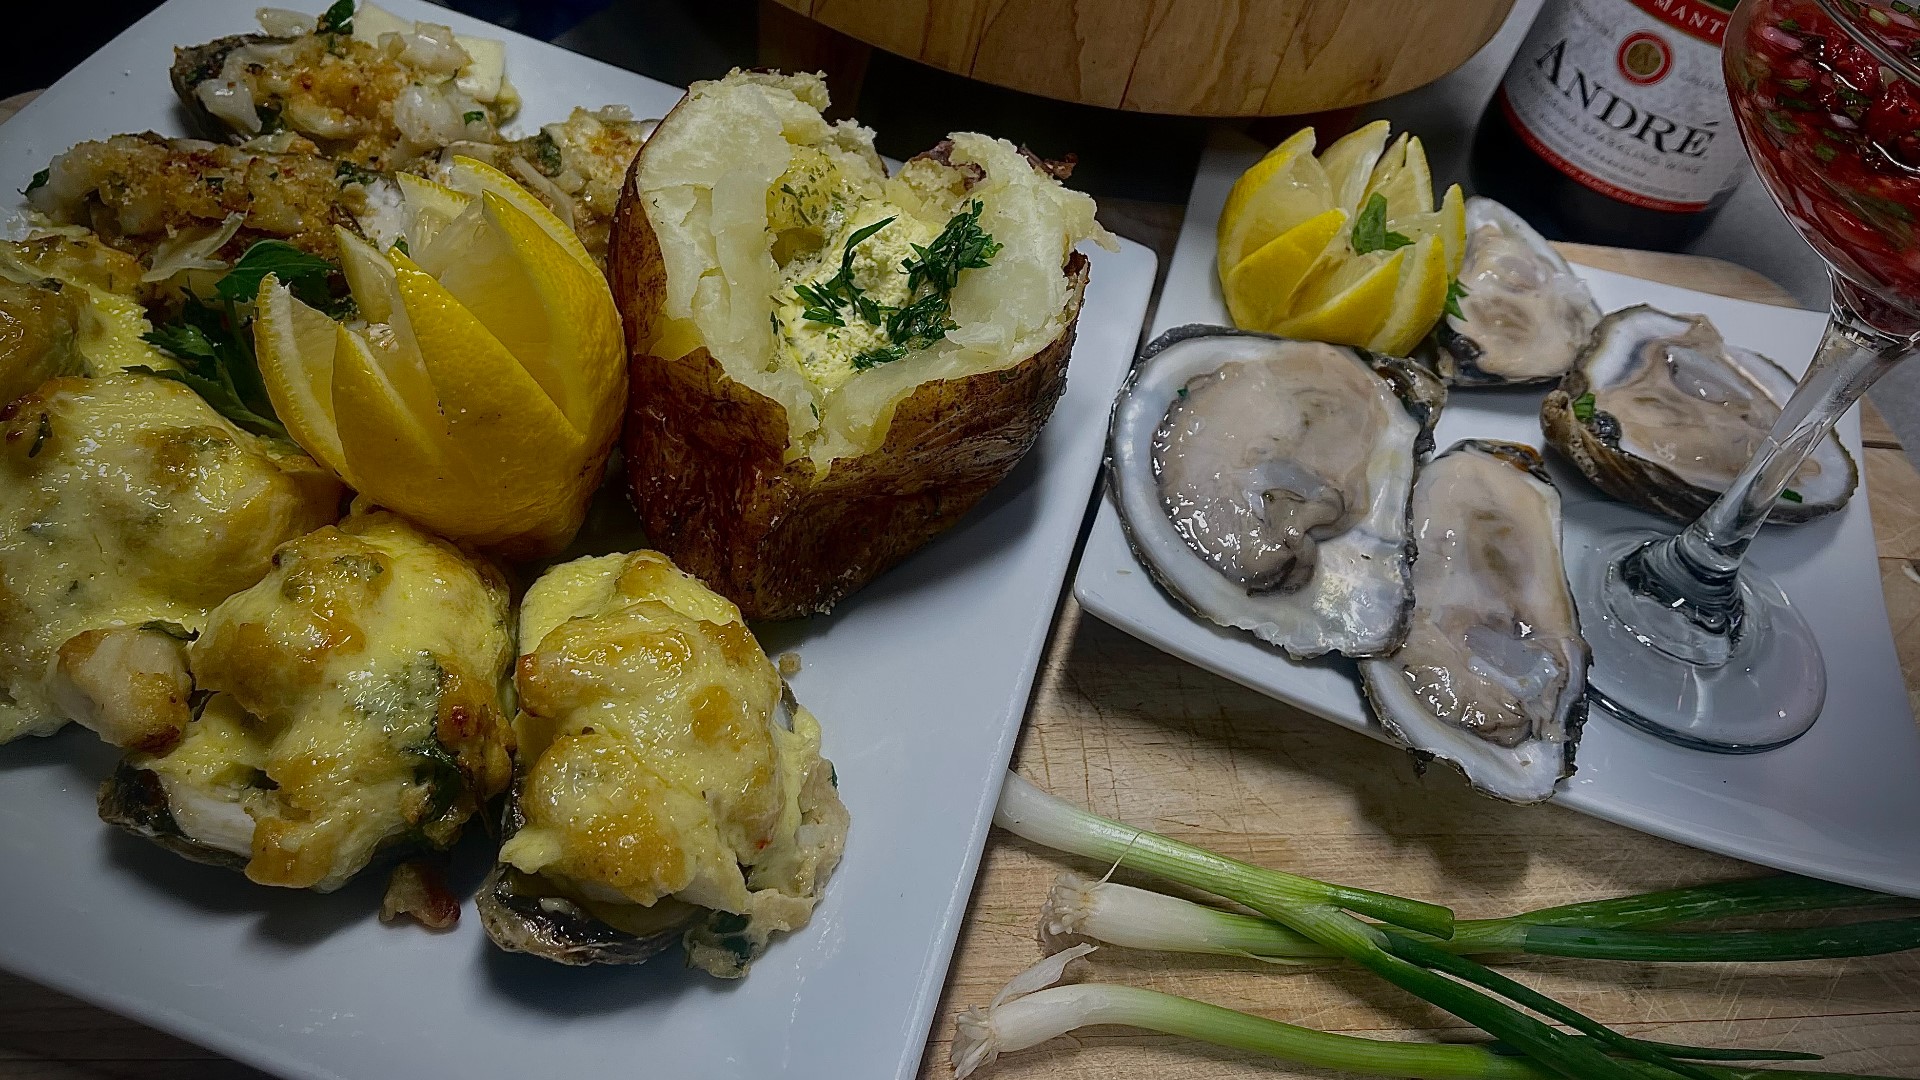 Olivia's makes oysters three ways: baked Mediterranean style, stuffed with colossal crab imperial and raw with a Champagne & Herb Mignonette.